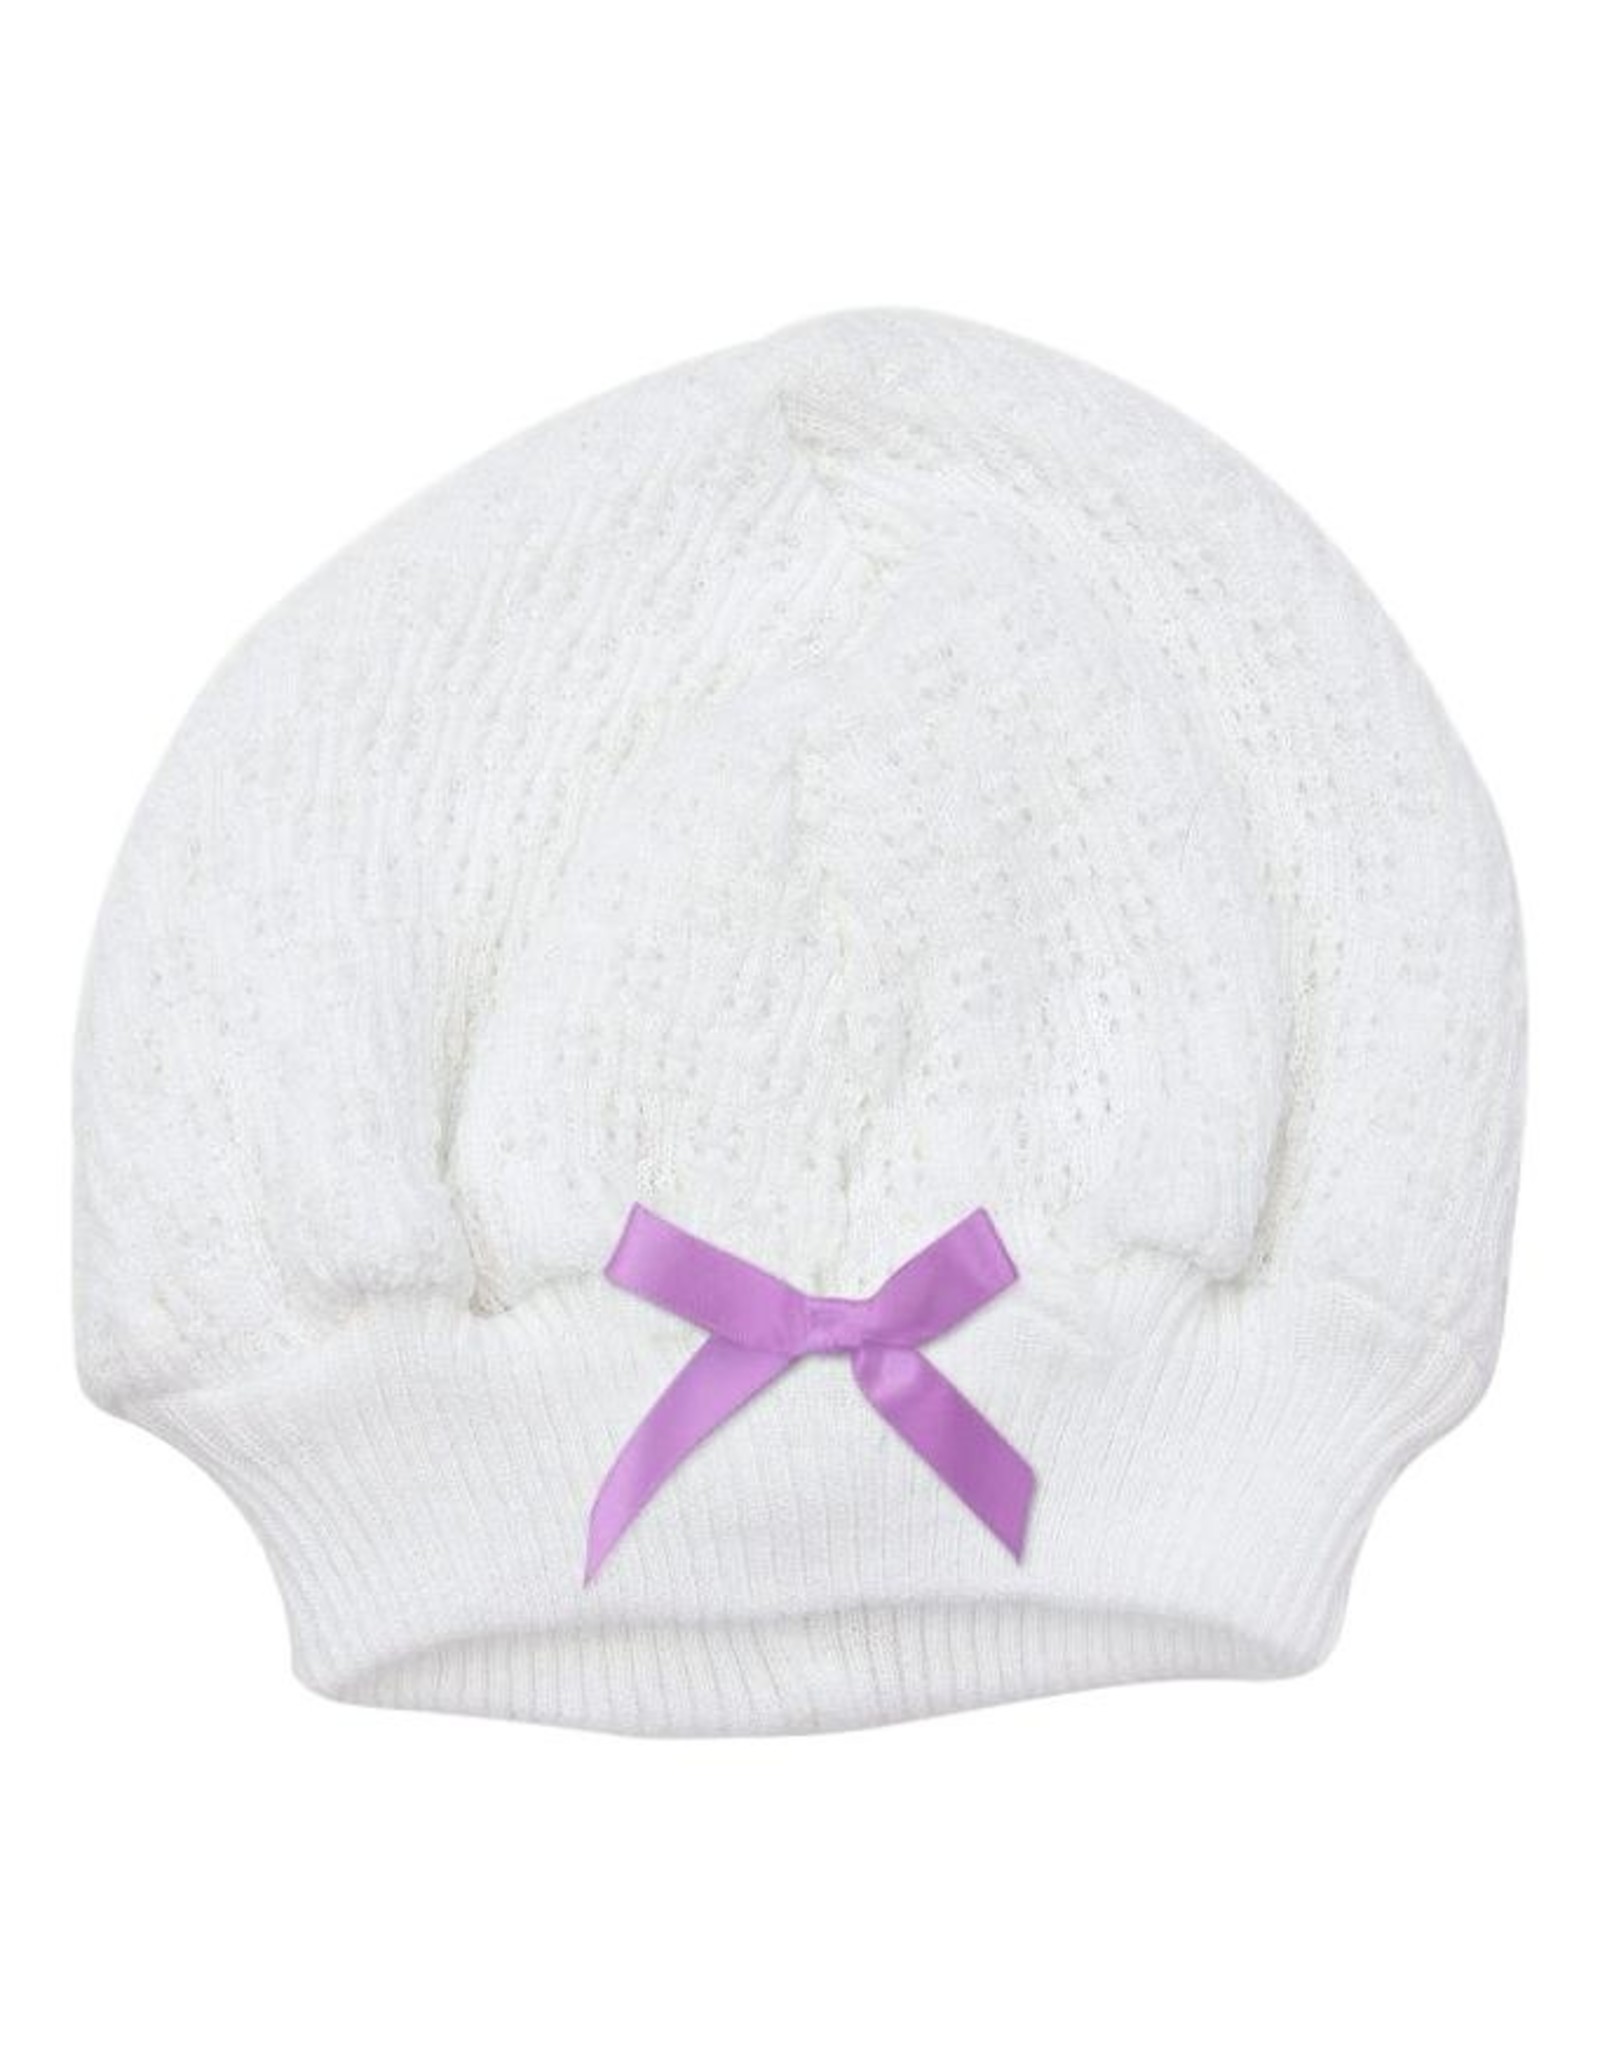 Paty, Inc. 105 Beanie Cap with Bow Lavender